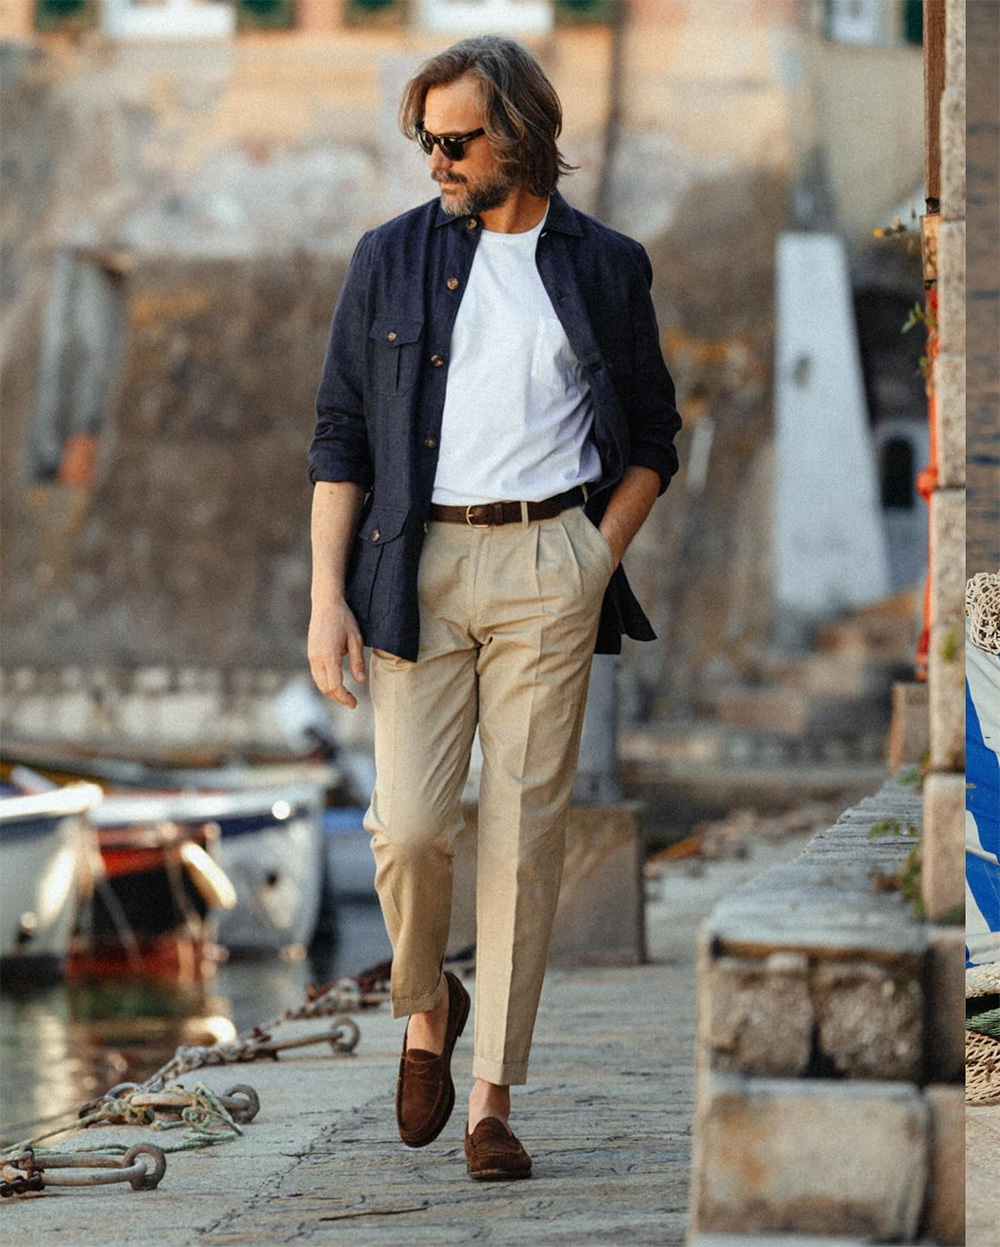 15 Expert Style Tips Every Man Should Know